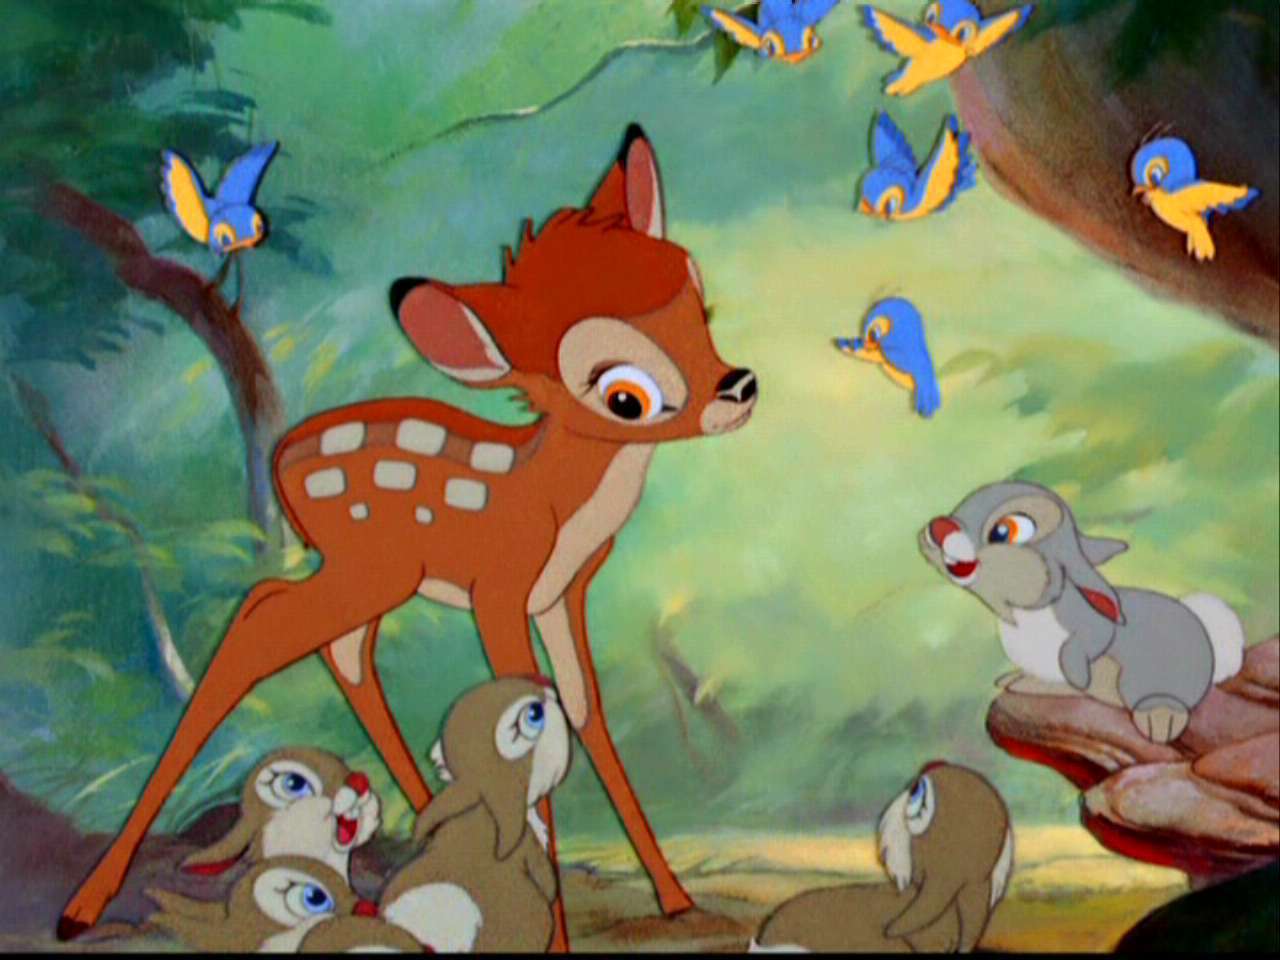 Bambi Image HD Wallpaper And Background Photos